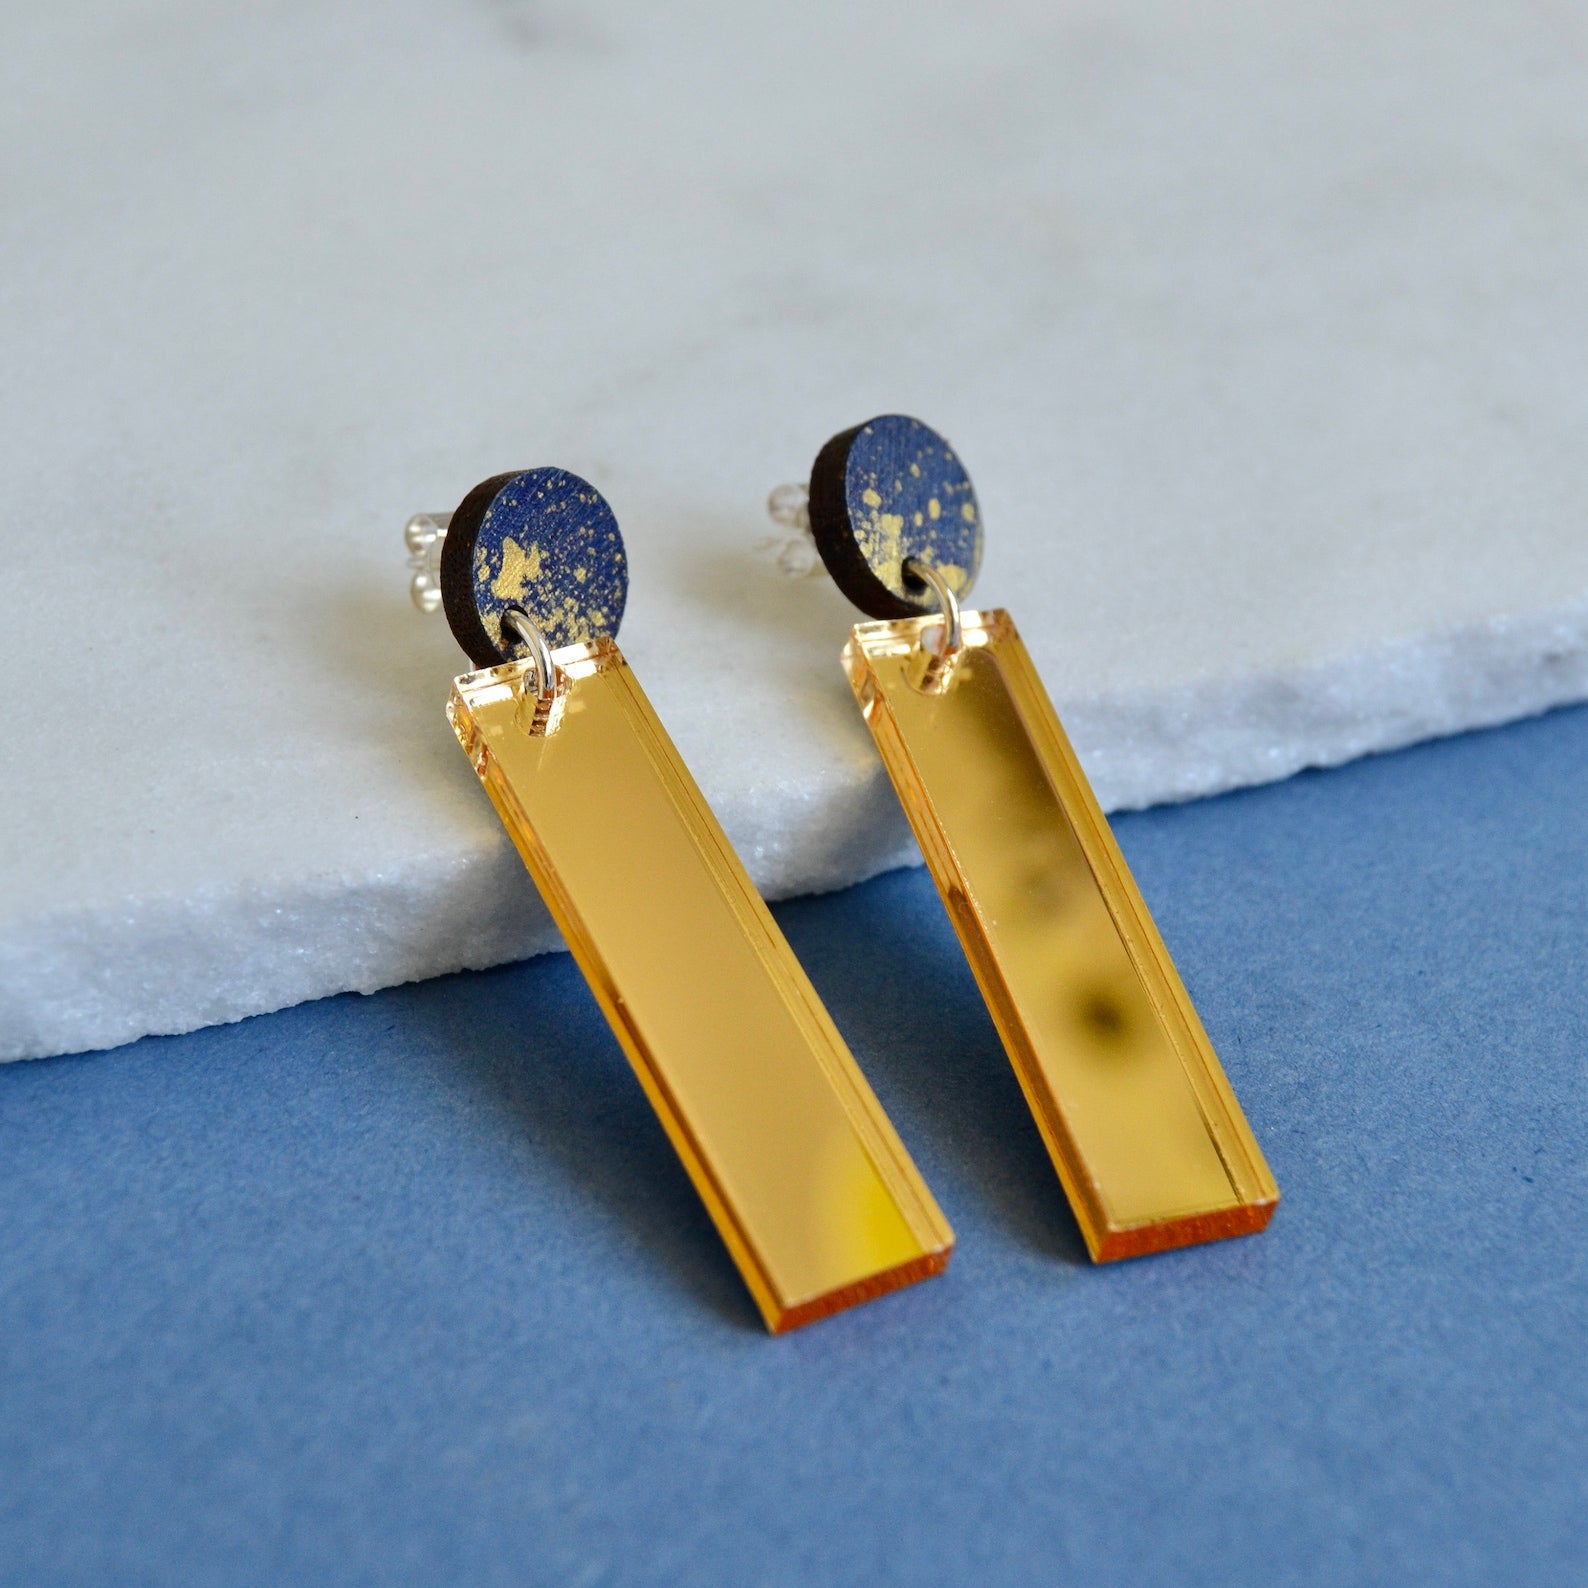 Gold Mirror Drop Earrings with Navy and Gold Stud